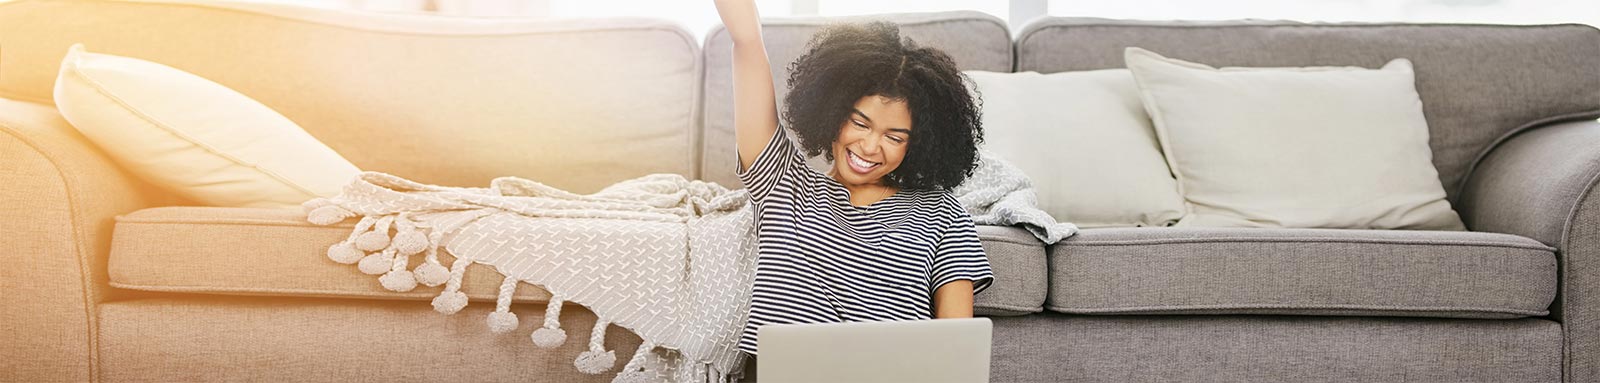 Woman smiling with fist in air sitting by her couch with a laptop